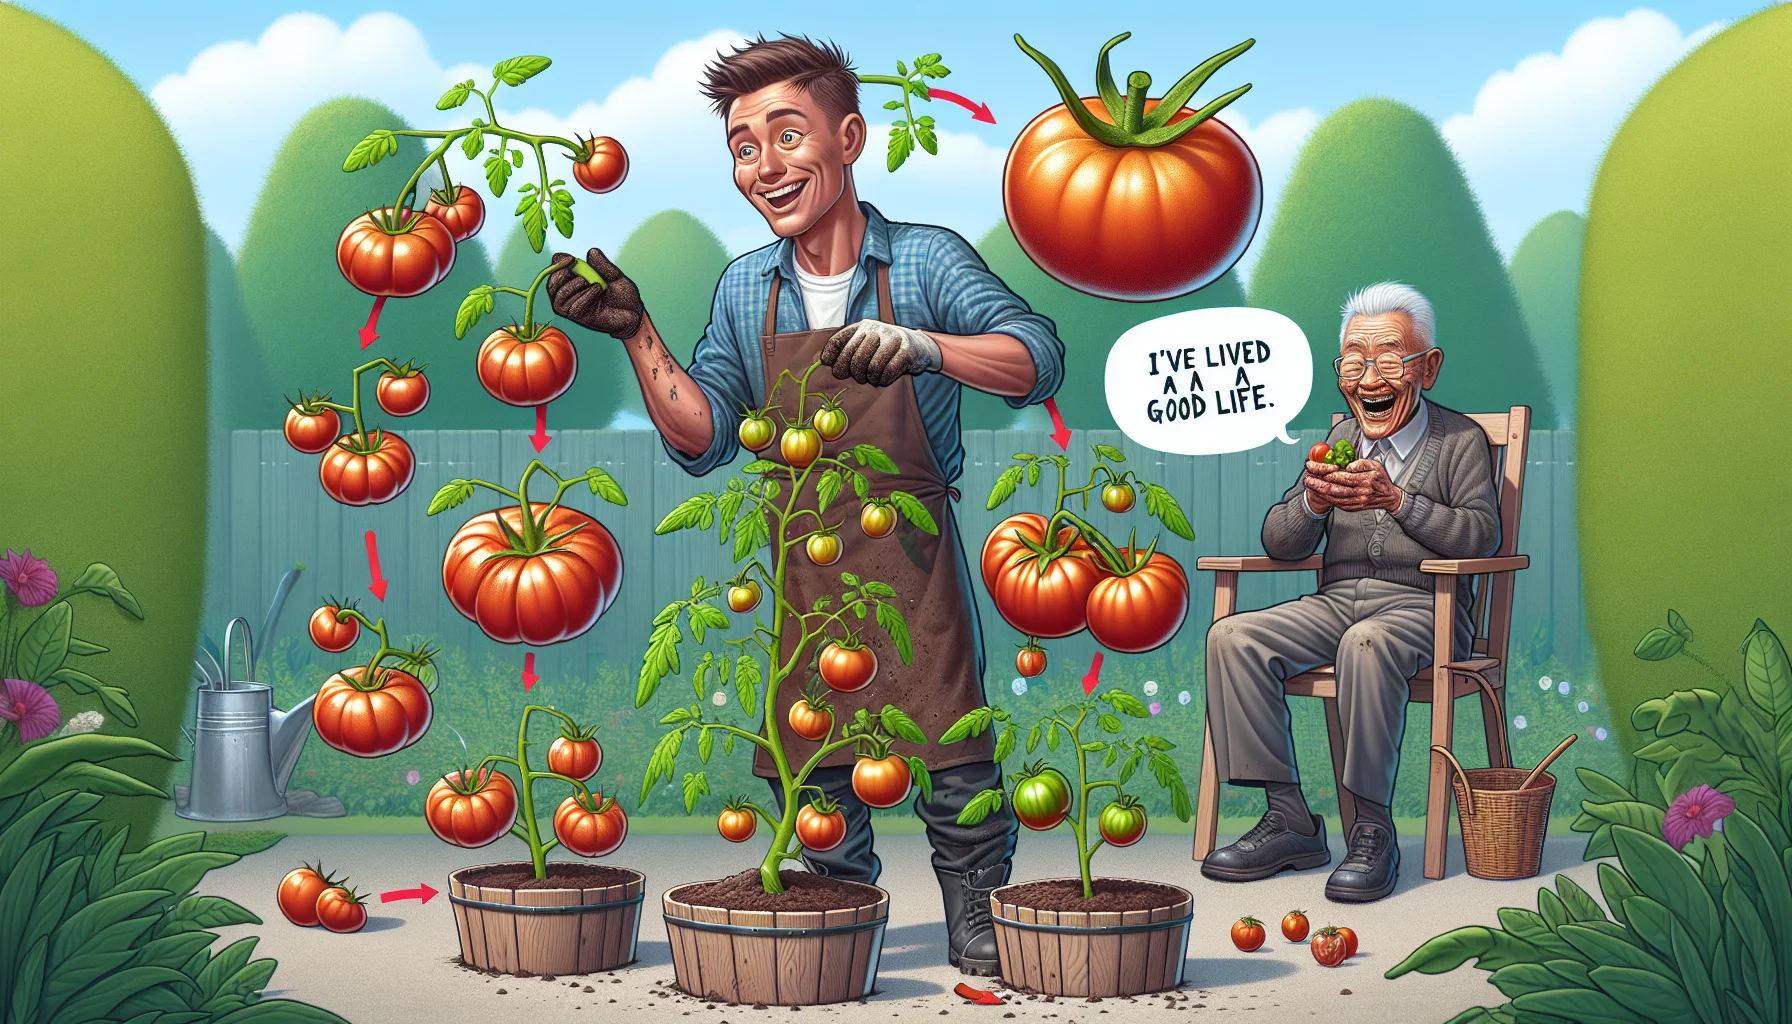 Create a detailed and humorous image illustrating the life cycle of tomato plants in a garden setting to encourage people to enjoy gardening. In the foreground, picture a Caucasian male gardener, with dirty hands and a grin on his face, holding a small tomato seedling. In the middle ground, display a black woman meticulously tending to a thriving tomato plant with numerous ripening tomatoes. Then, in the background, portray an elderly Asian man sitting on a garden bench, laughing heartily while examining an overgrown, drooping tomato plant with a sign declaring 'I've lived a good life'. Let's show how fun and satisfying gardening can be!